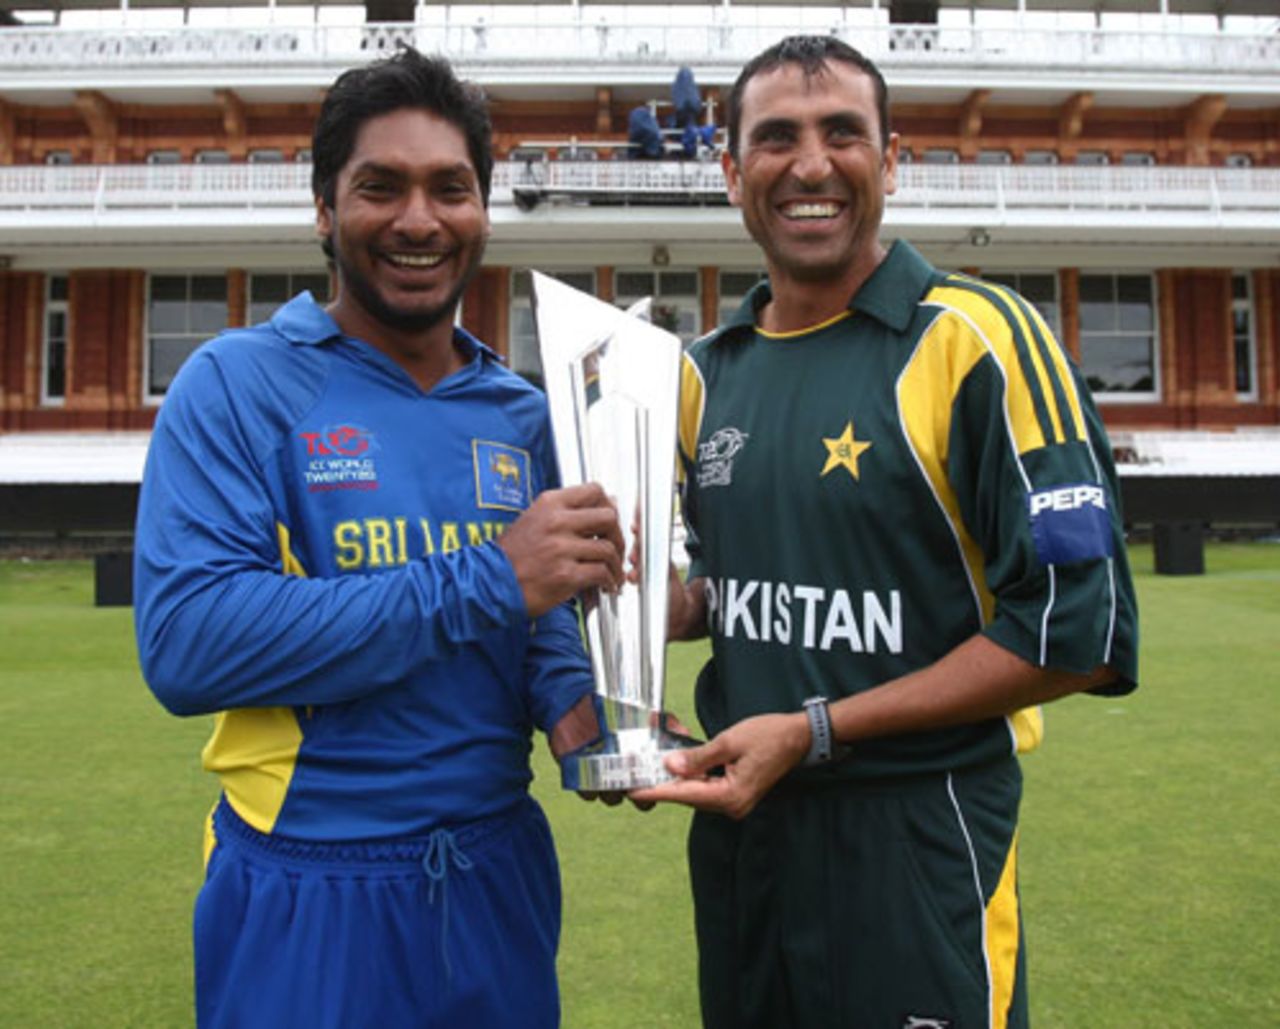 Rival captains pose on the eve of the ICC World Twenty20 finals, ICC World Twenty20 finals